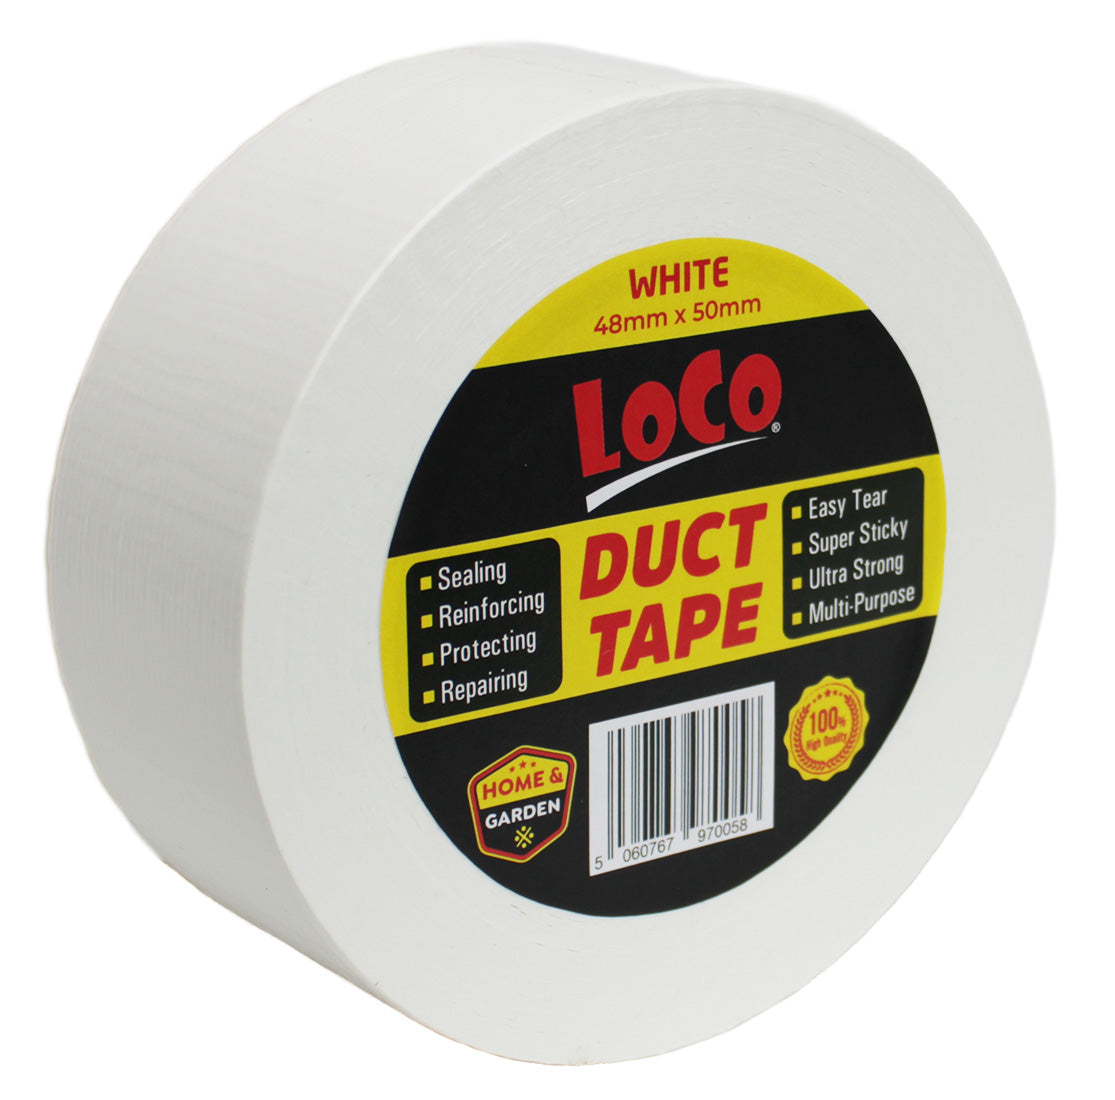 DUCT TAPE WHITE 48mm x 50m